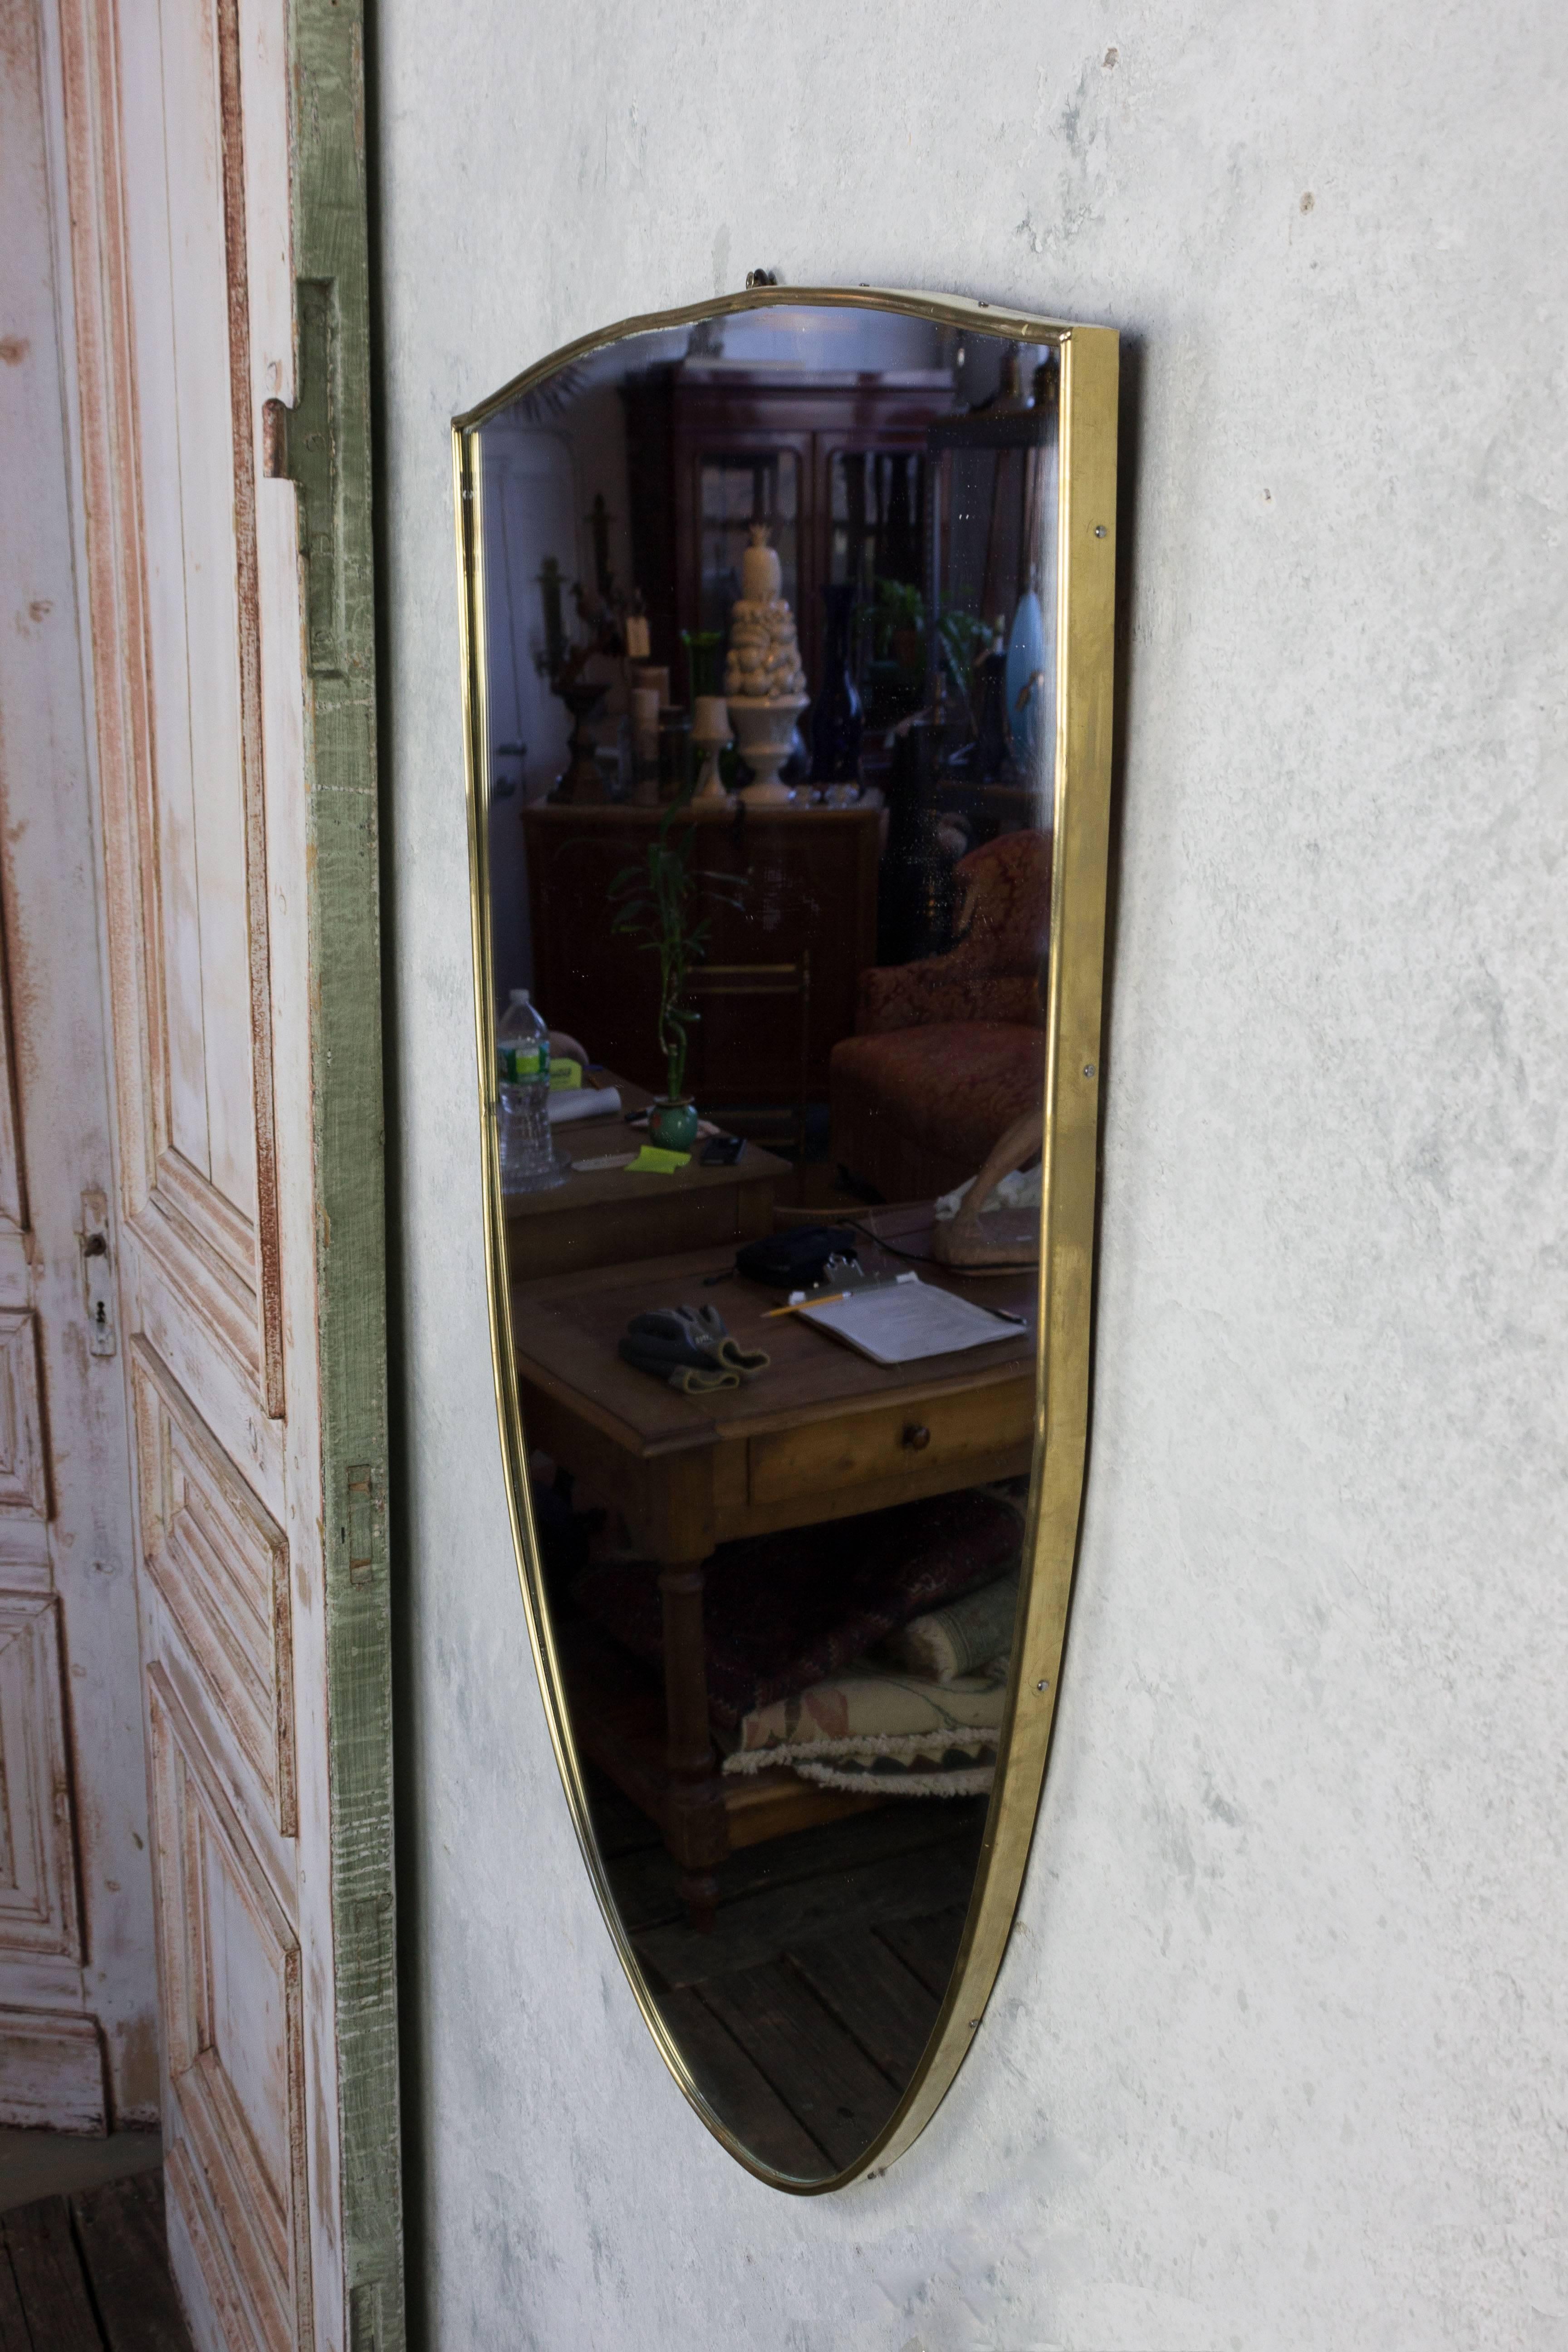 Pair of shield shaped mirrors in a clean brass frame, Italian, circa 1960. Very good vintage condition. Possible to split the pair at $1,200 each.

Ref#: DM0215-15

Dimensions: 33”H x 21.25